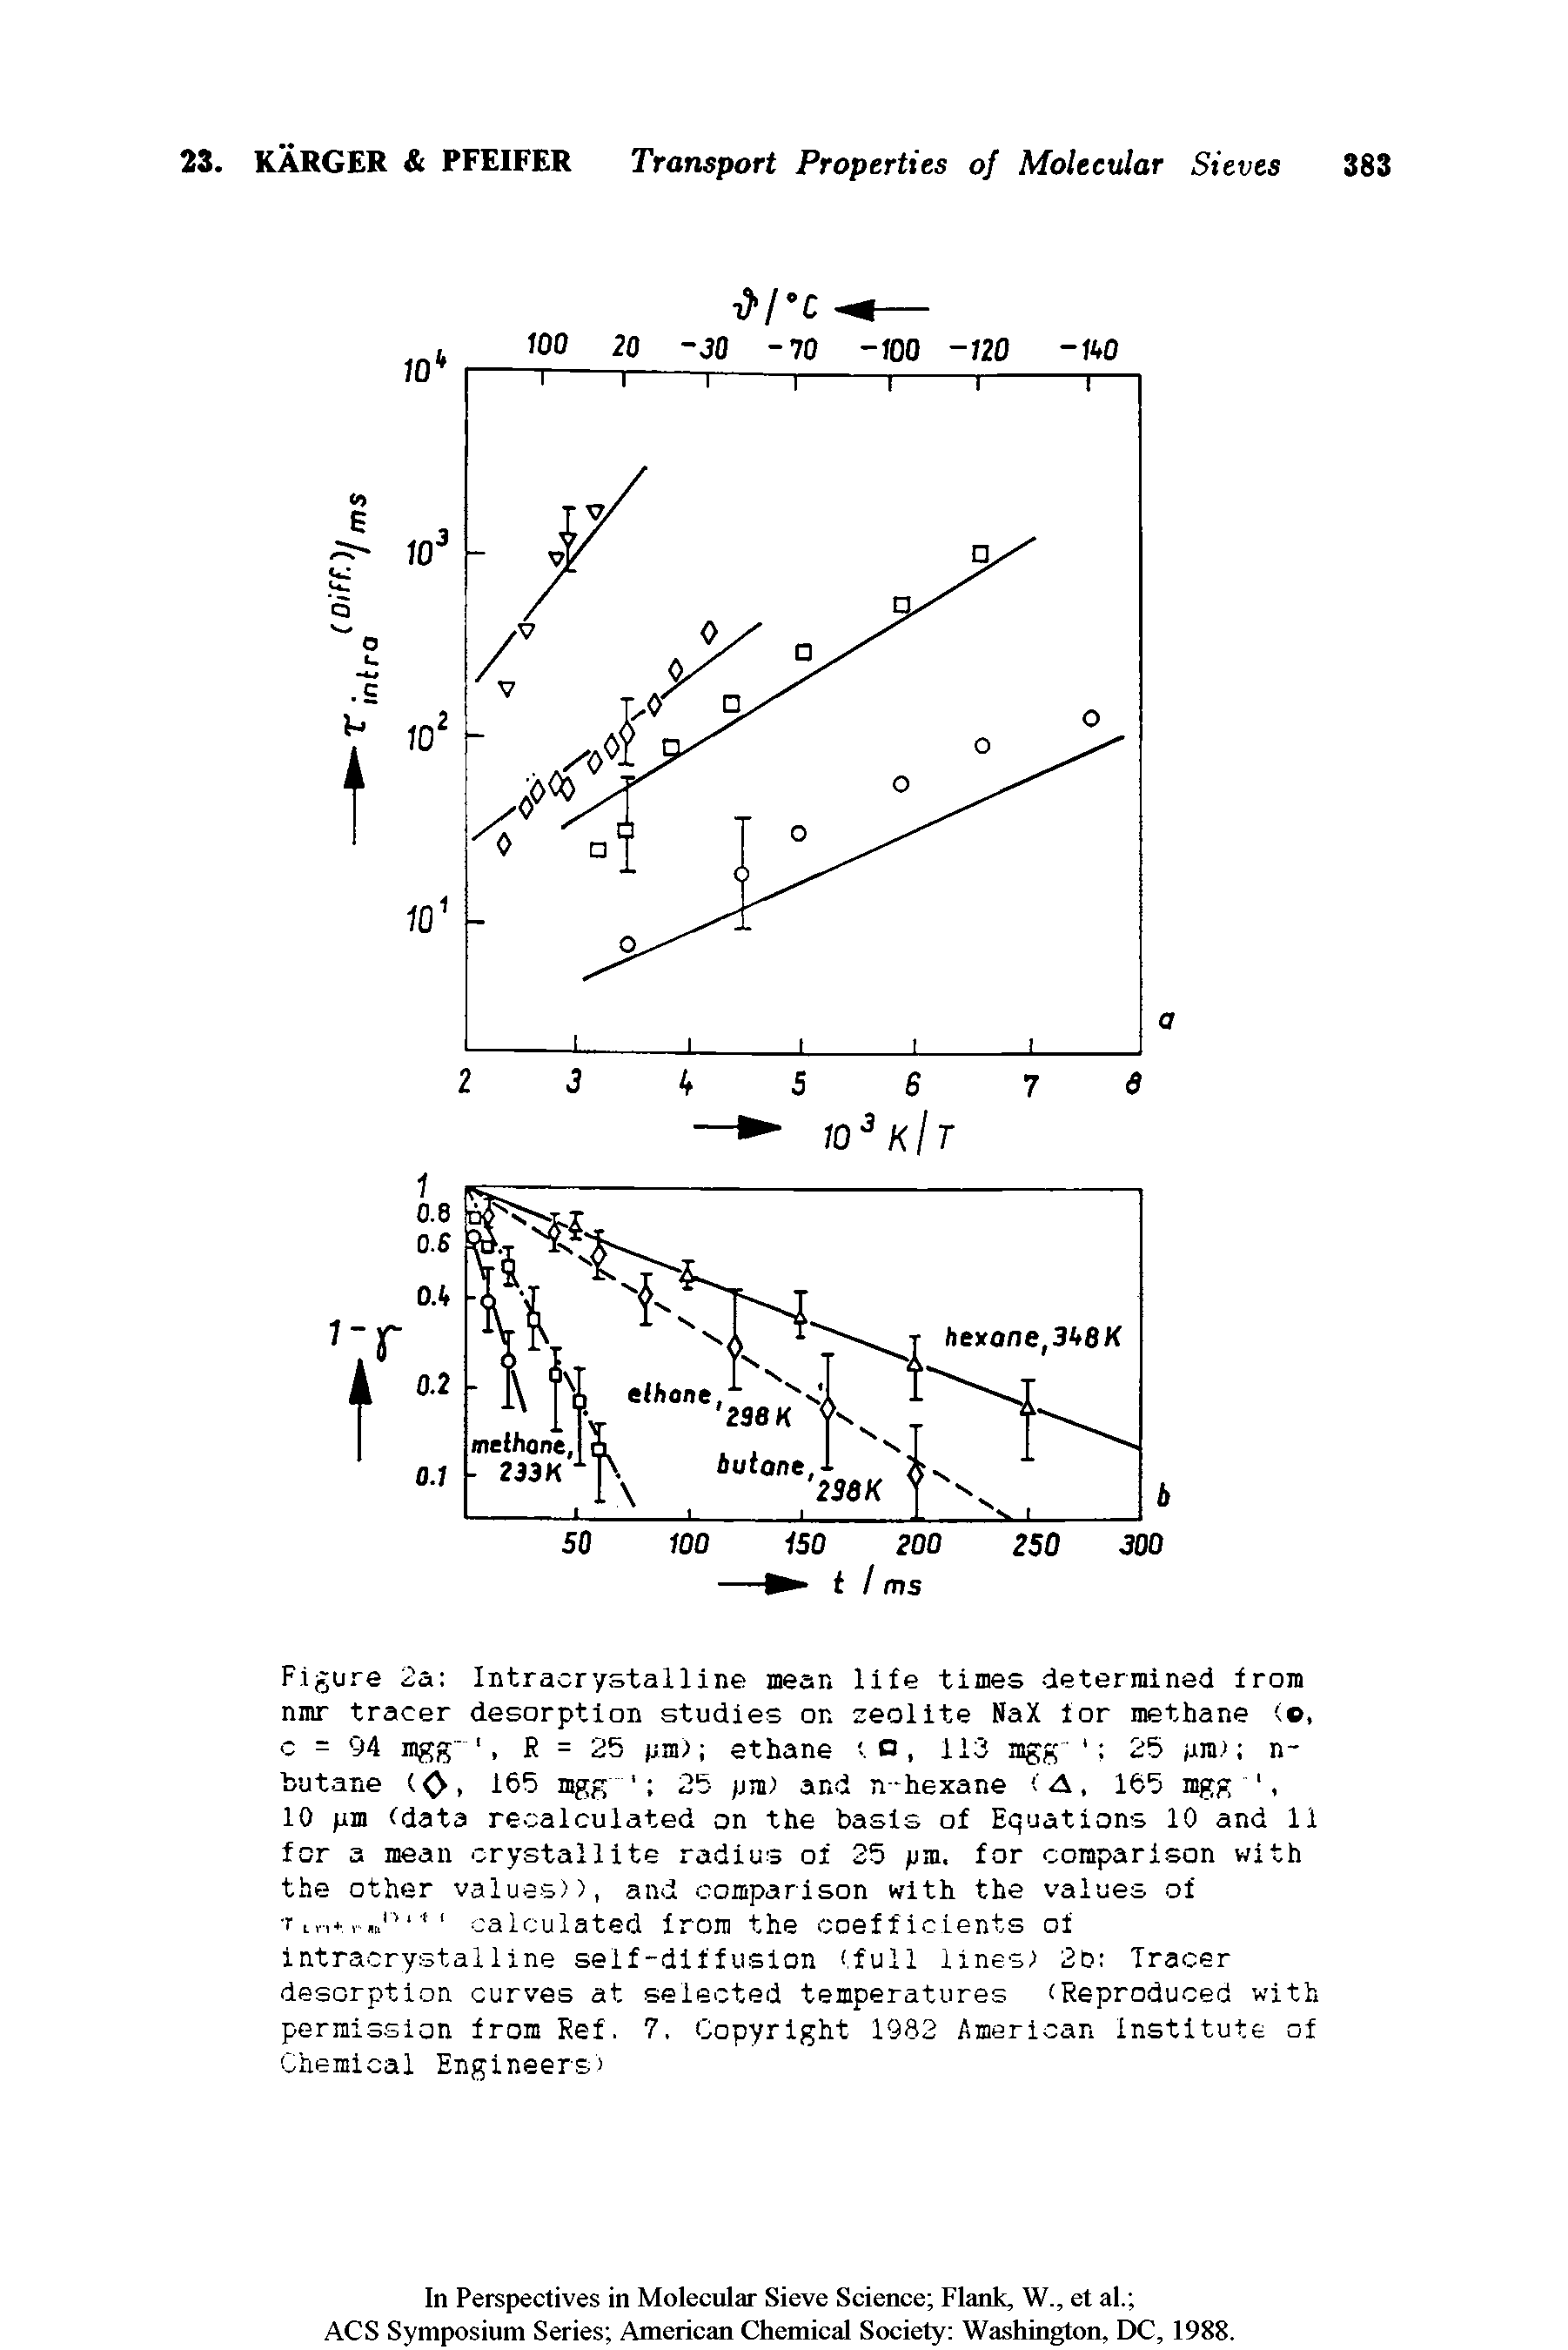 Figure 2a Intracrystalline near, life times determined from nmr tracer desorption studies on zeolite NaX for methane < , c = 94 ngg-, R = 25 pa) ethane t. 0, 113 mgg 25 urn n-butane (, 165 mgg 25 pm) and n-hexane (A, 165 mgg, ...